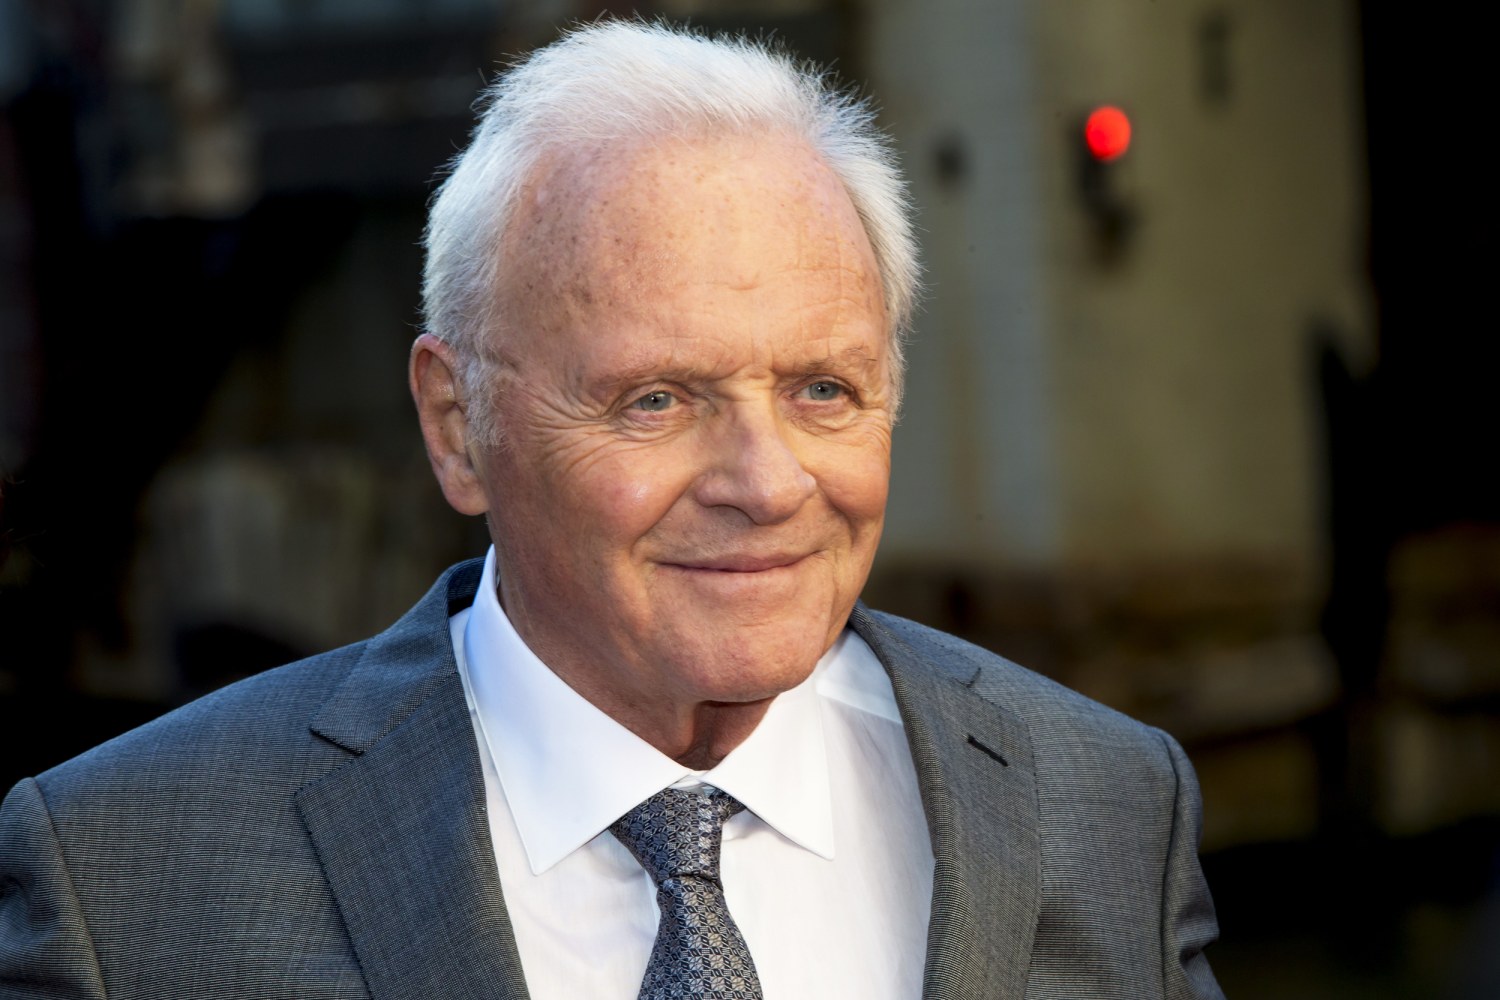 Oscars 2021: In a surprise, Anthony Hopkins wins best actor for